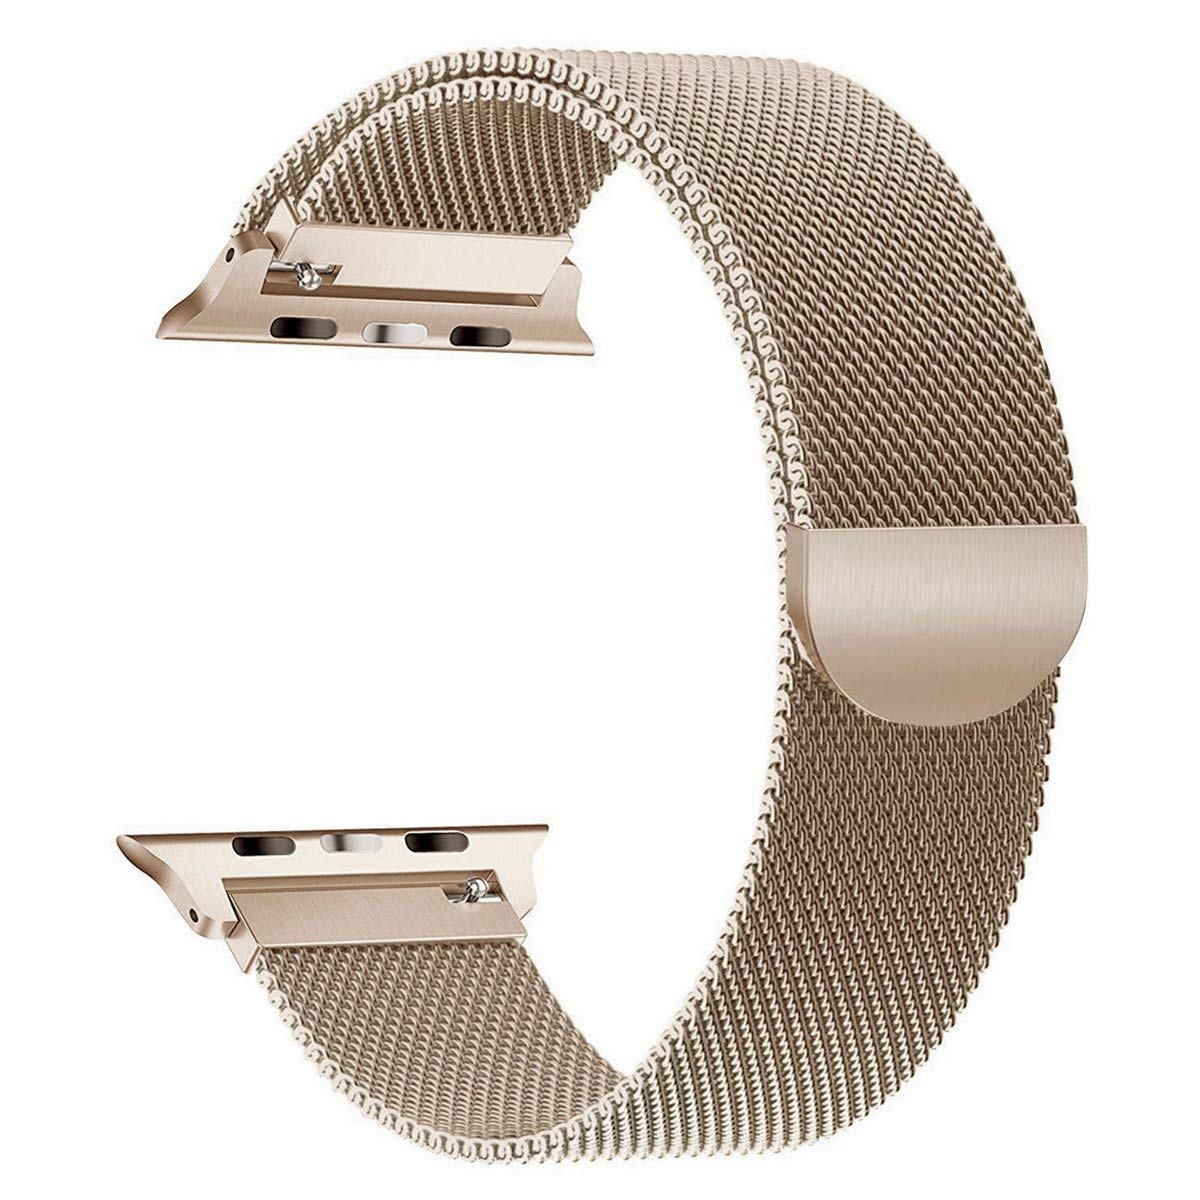 Premium Color Stainless Steel Magnetic Milanese Loop Strap Wristband